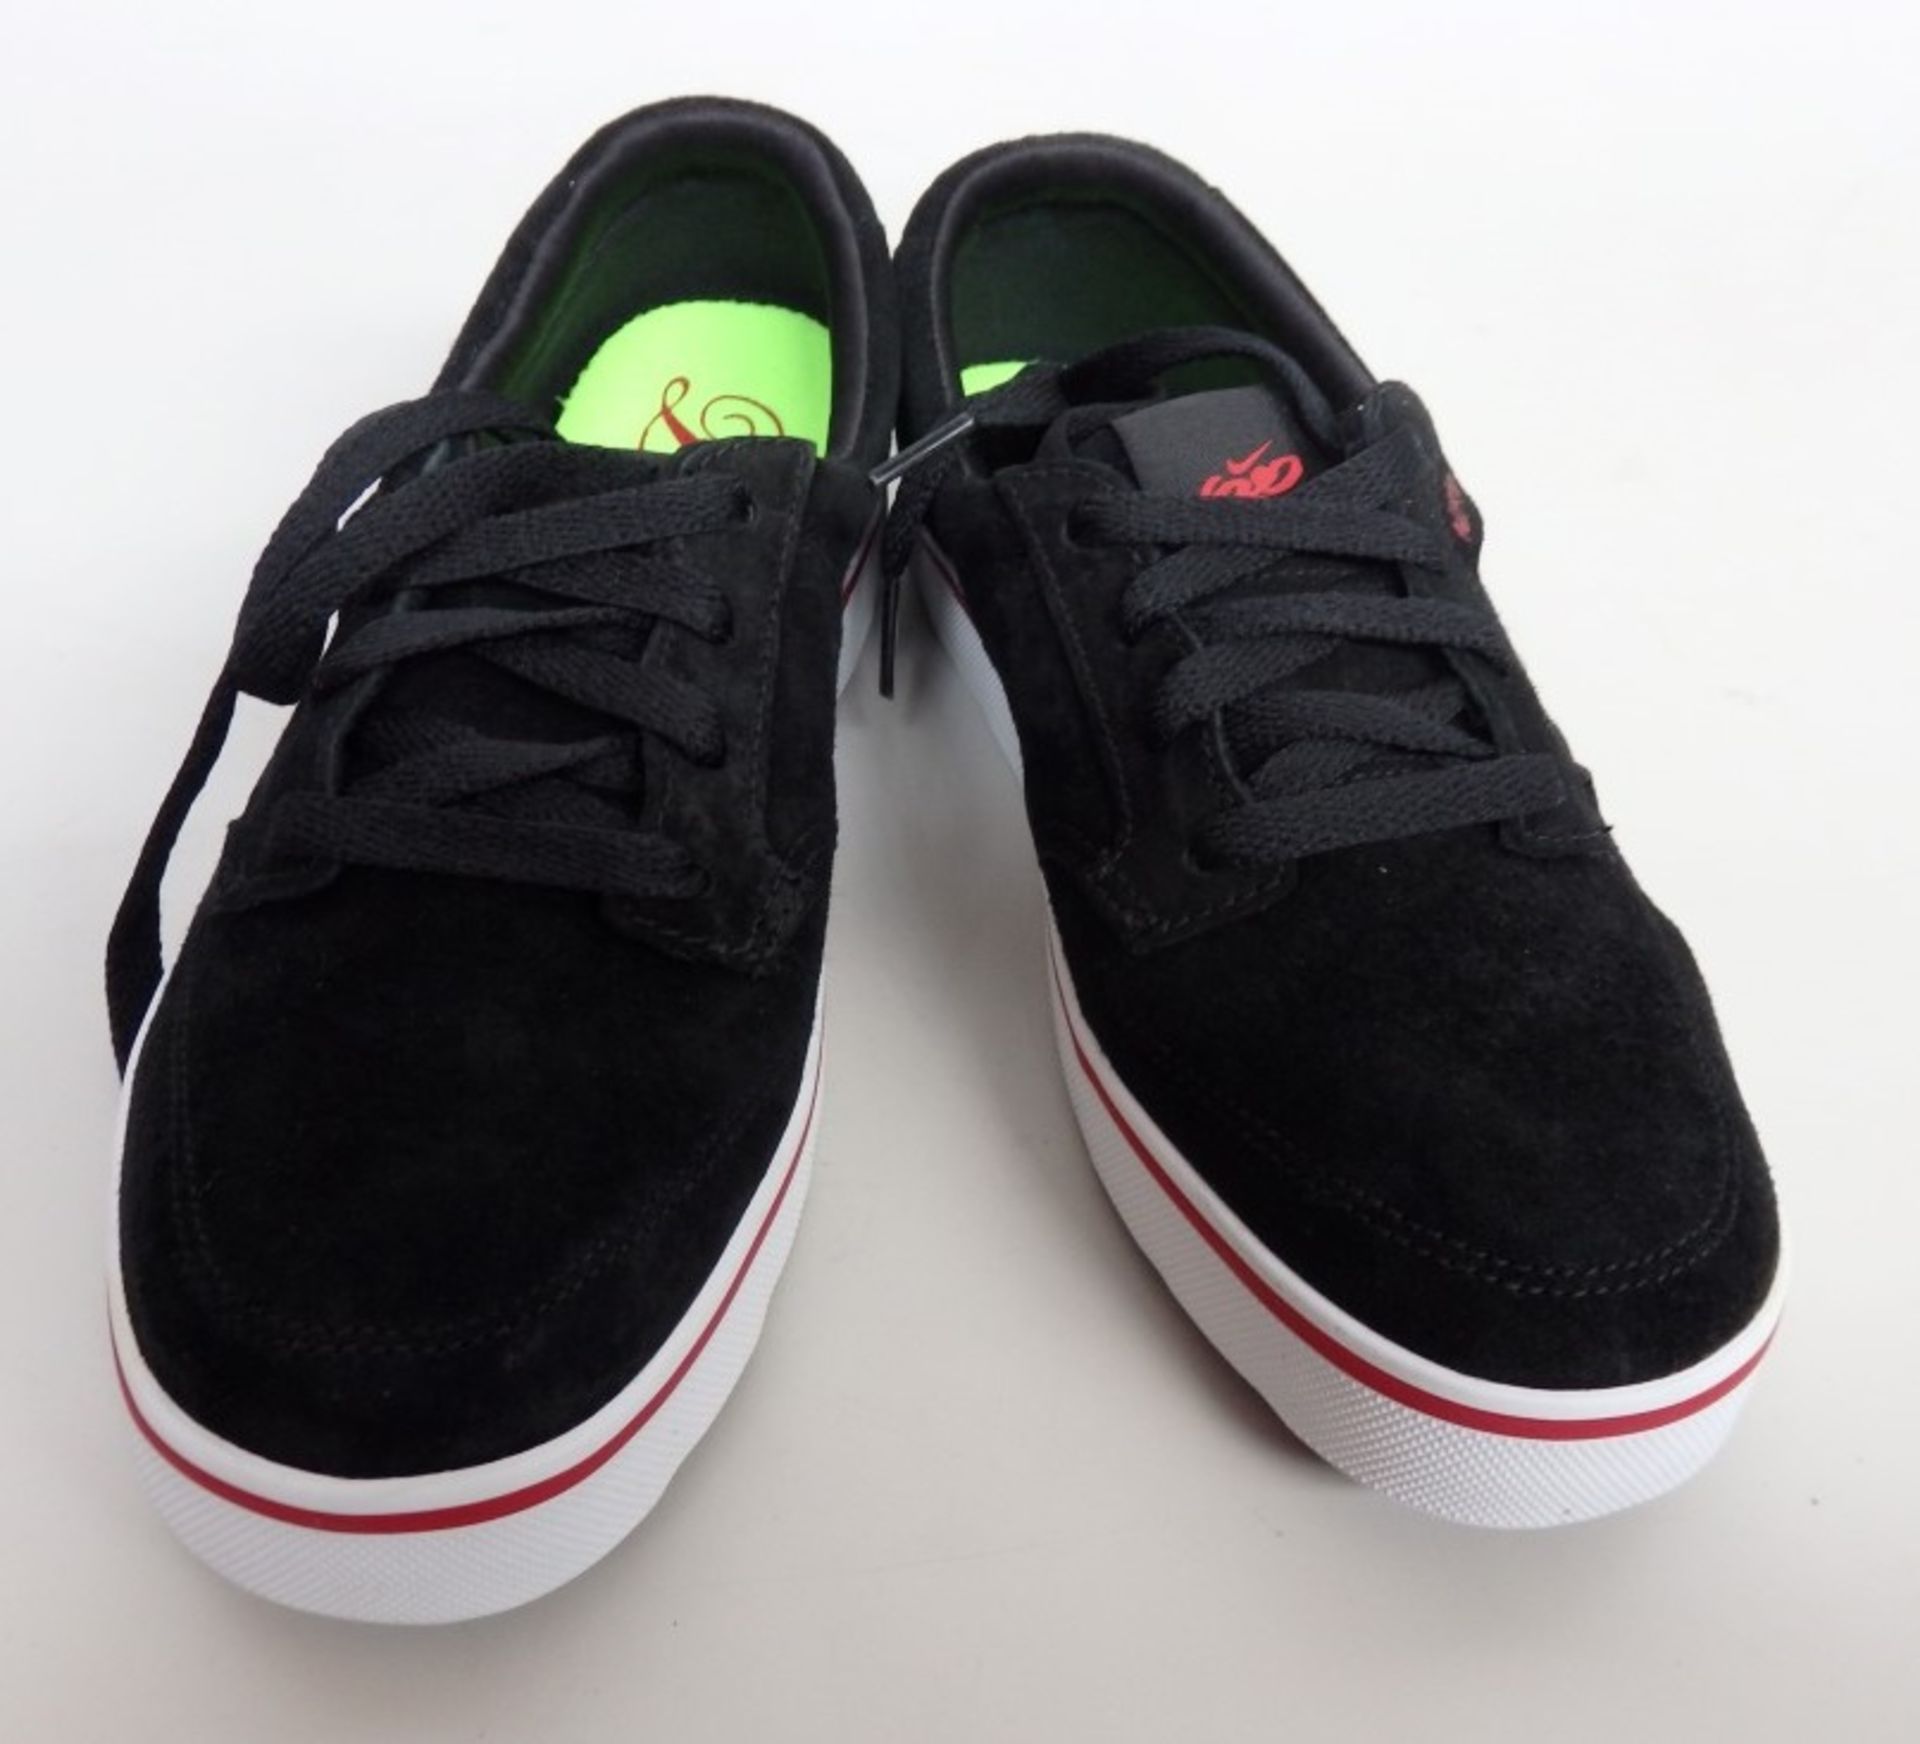 1 x Pair Of Nike Braata Premium Suede Trainers - Boys Size: UK 4.5 - New & Boxed - Colour: Black & - Image 3 of 7